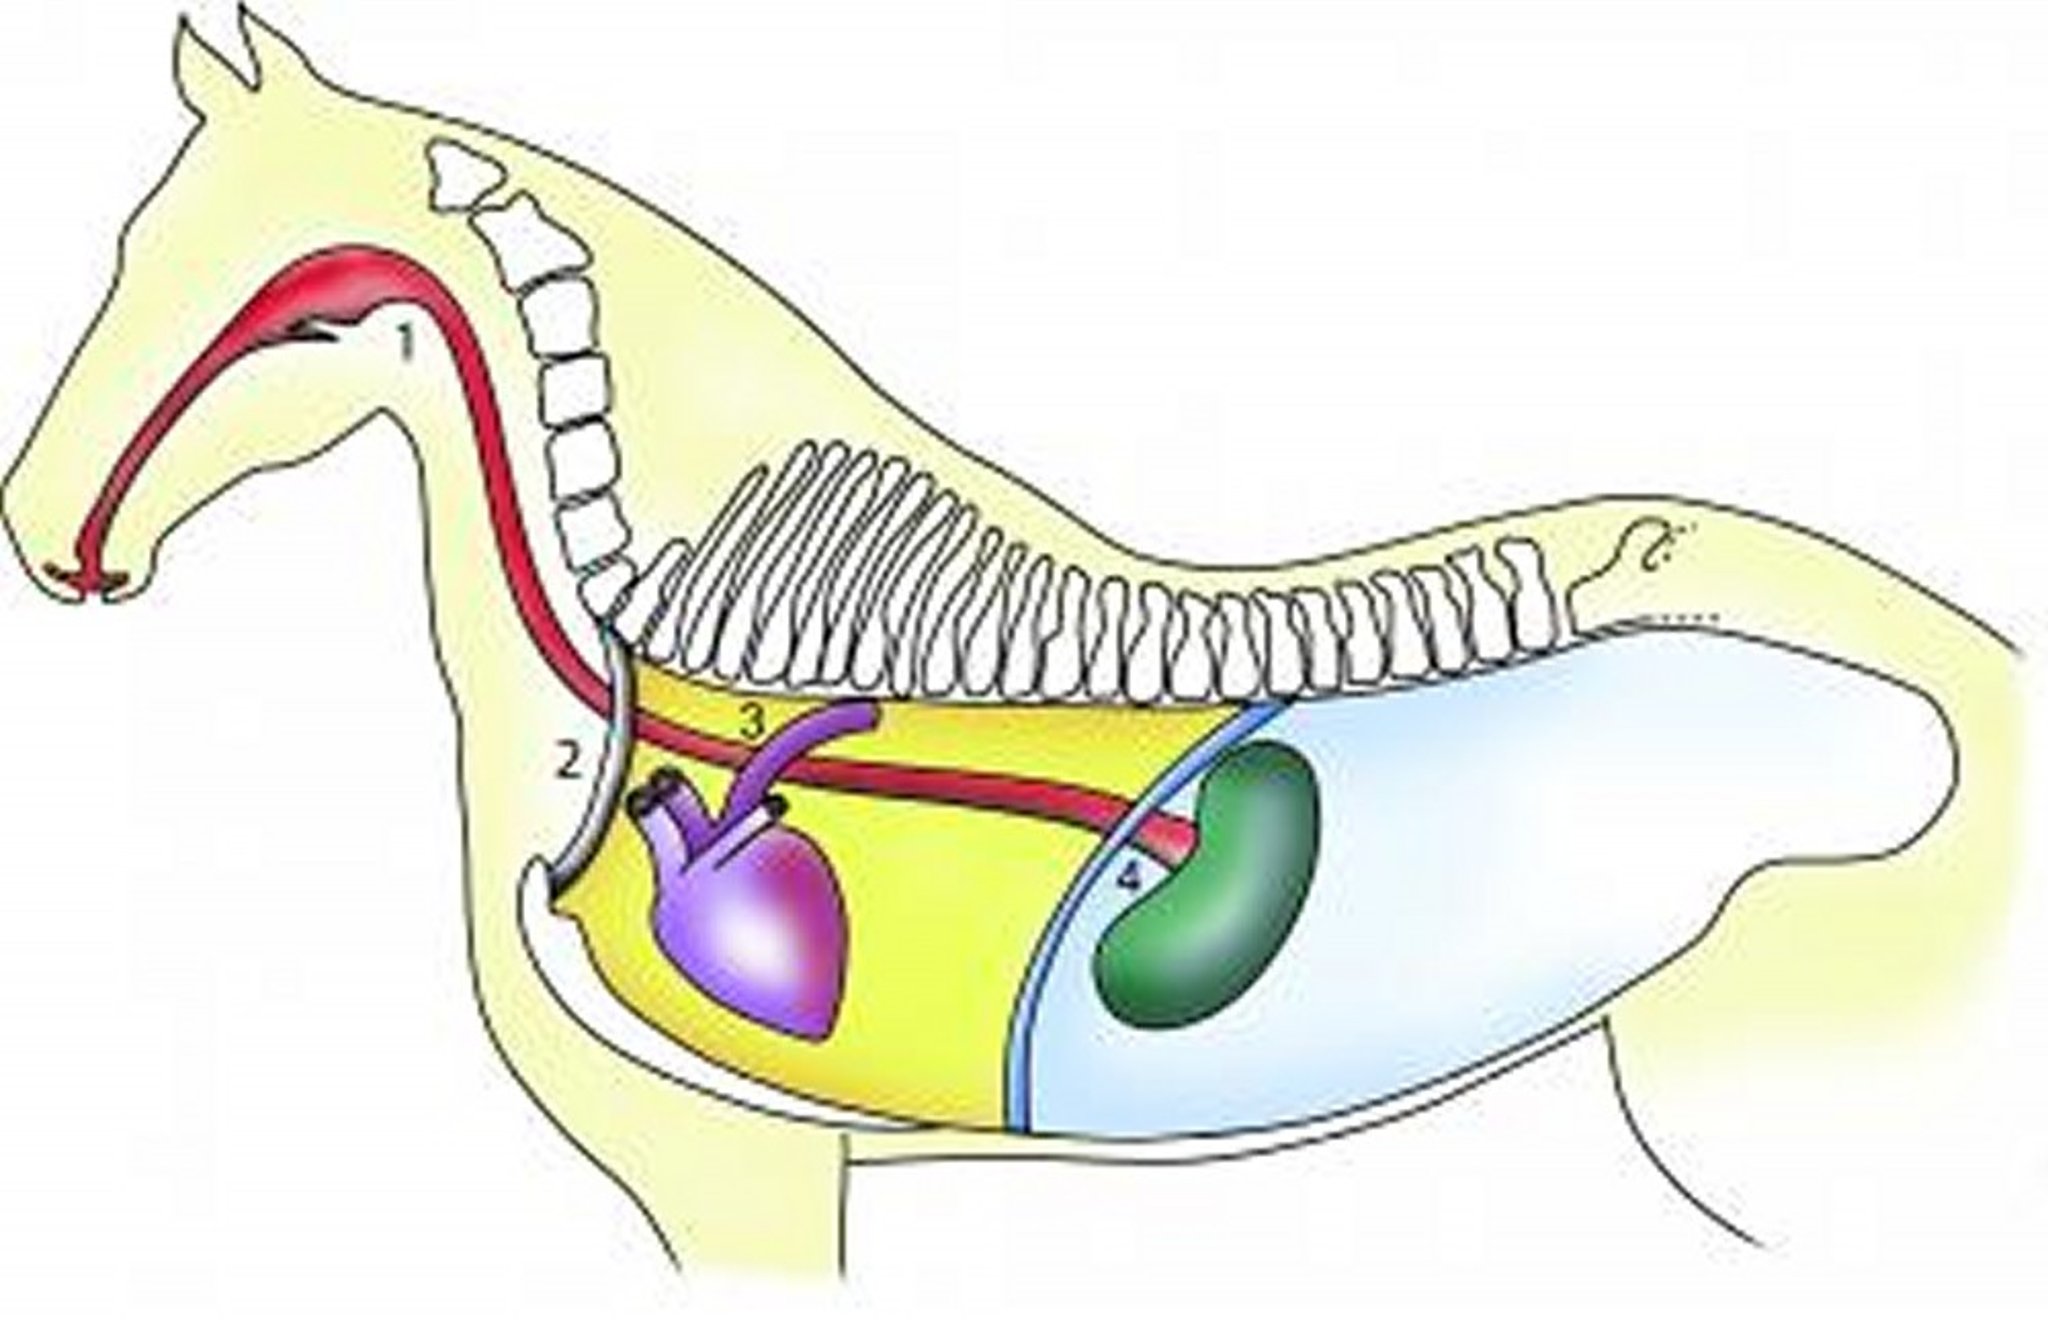 Esophageal obstruction sites, horse